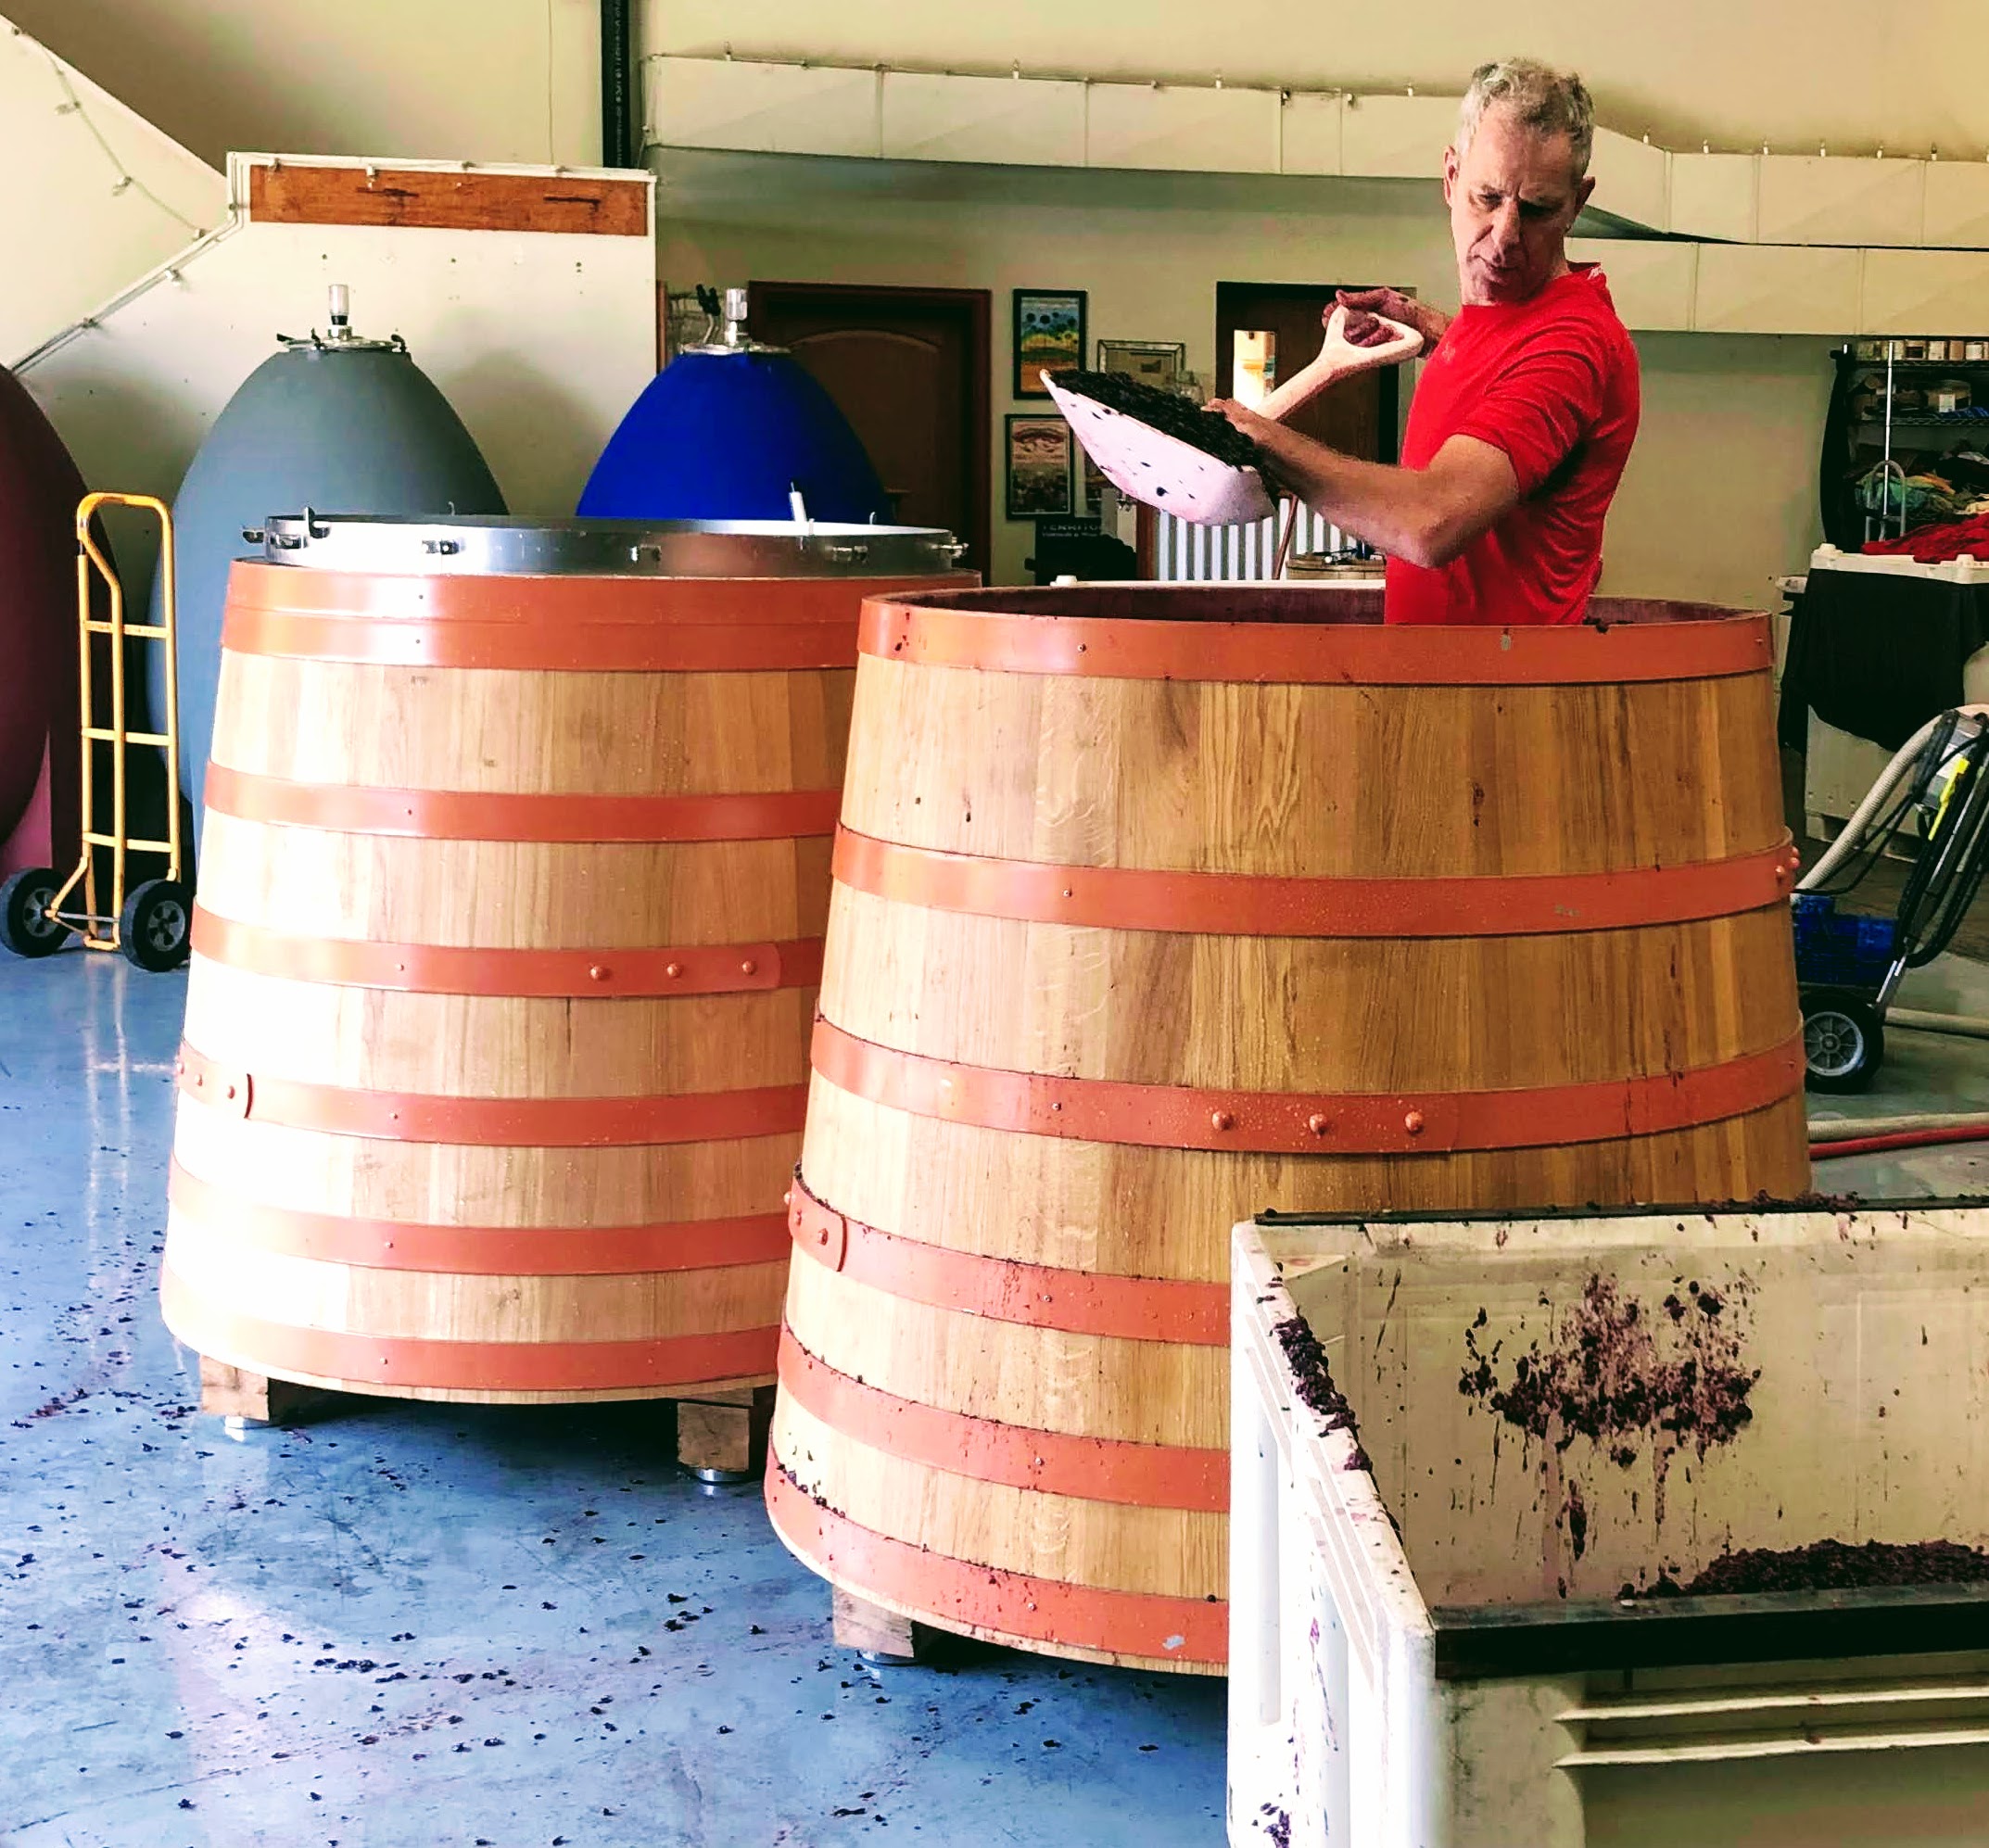 A winemaker uses a shovel to put grapes in an oak barrel.